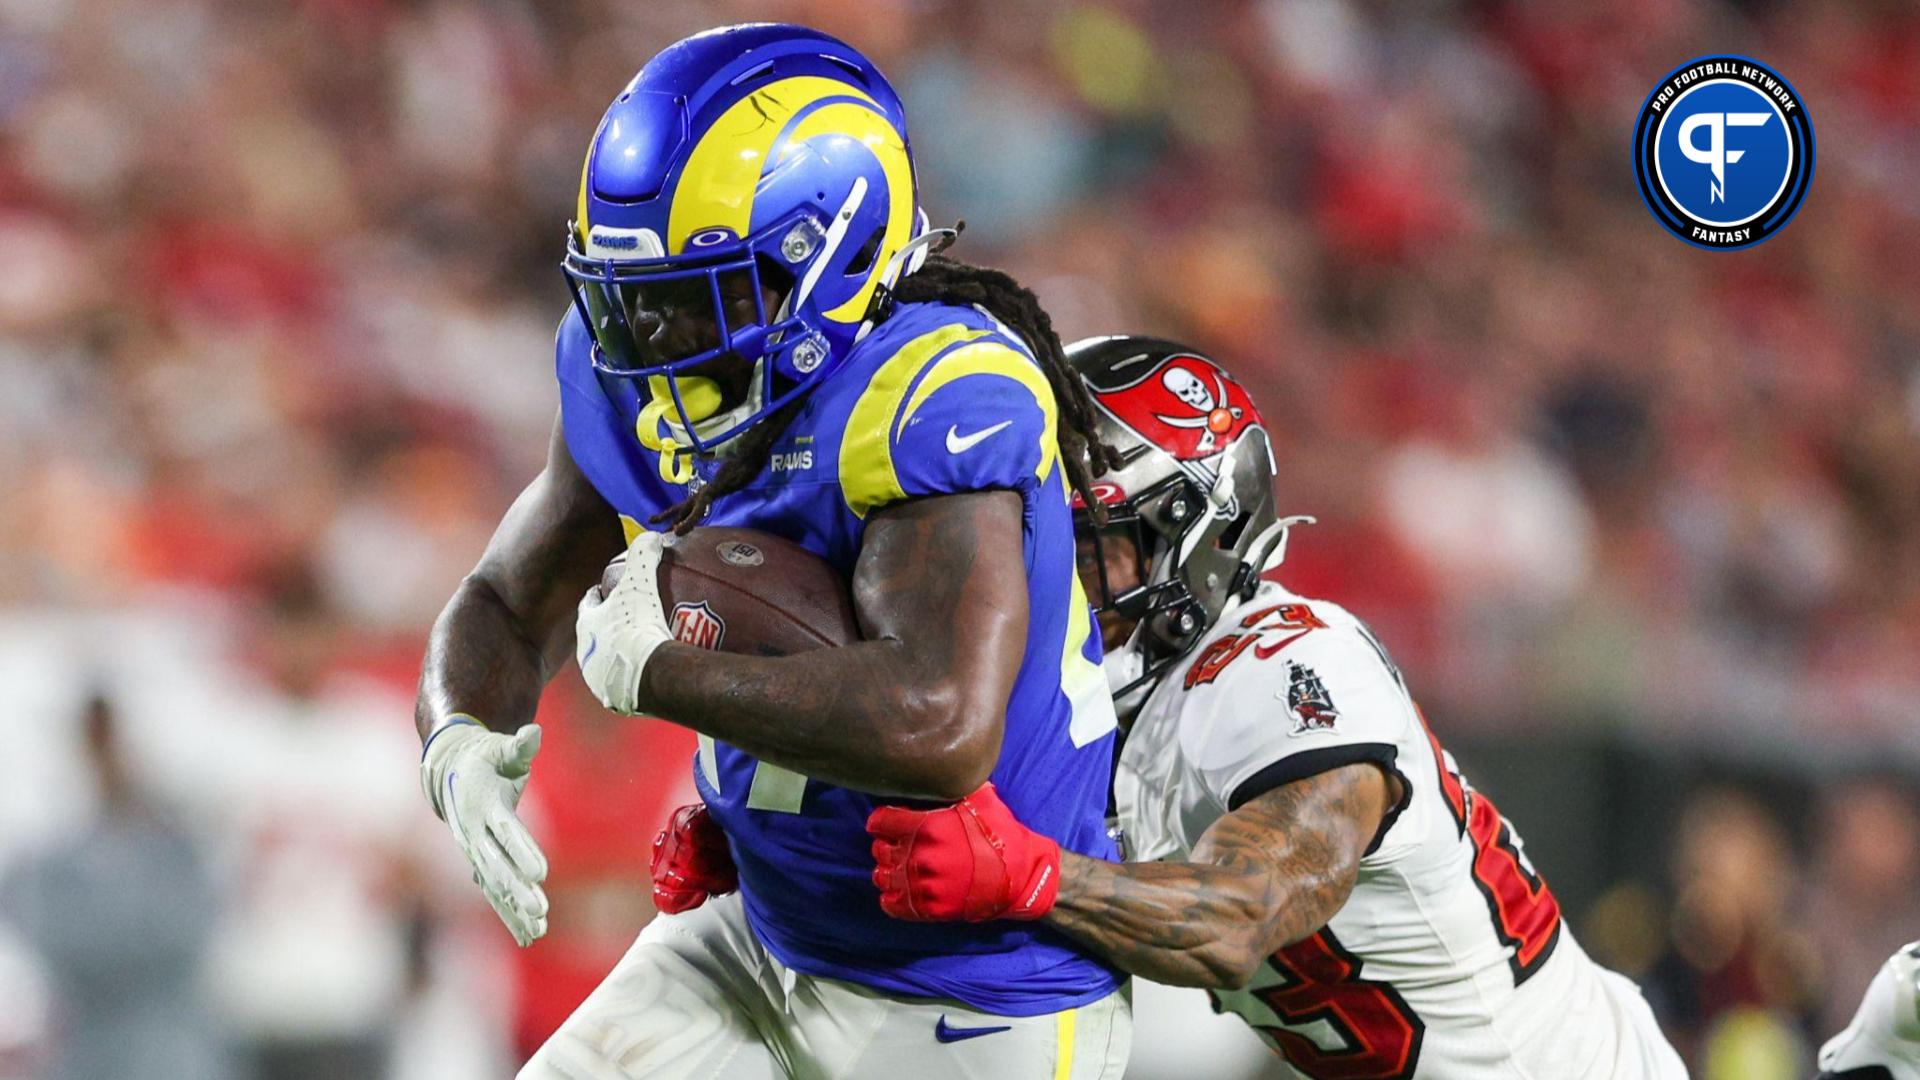 Los Angeles Rams running back Darrell Henderson Jr. (27) is tackled by Tampa Bay Buccaneers cornerback Sean Murphy-Bunting (23) in the third quarter at Raymond James Stadium.